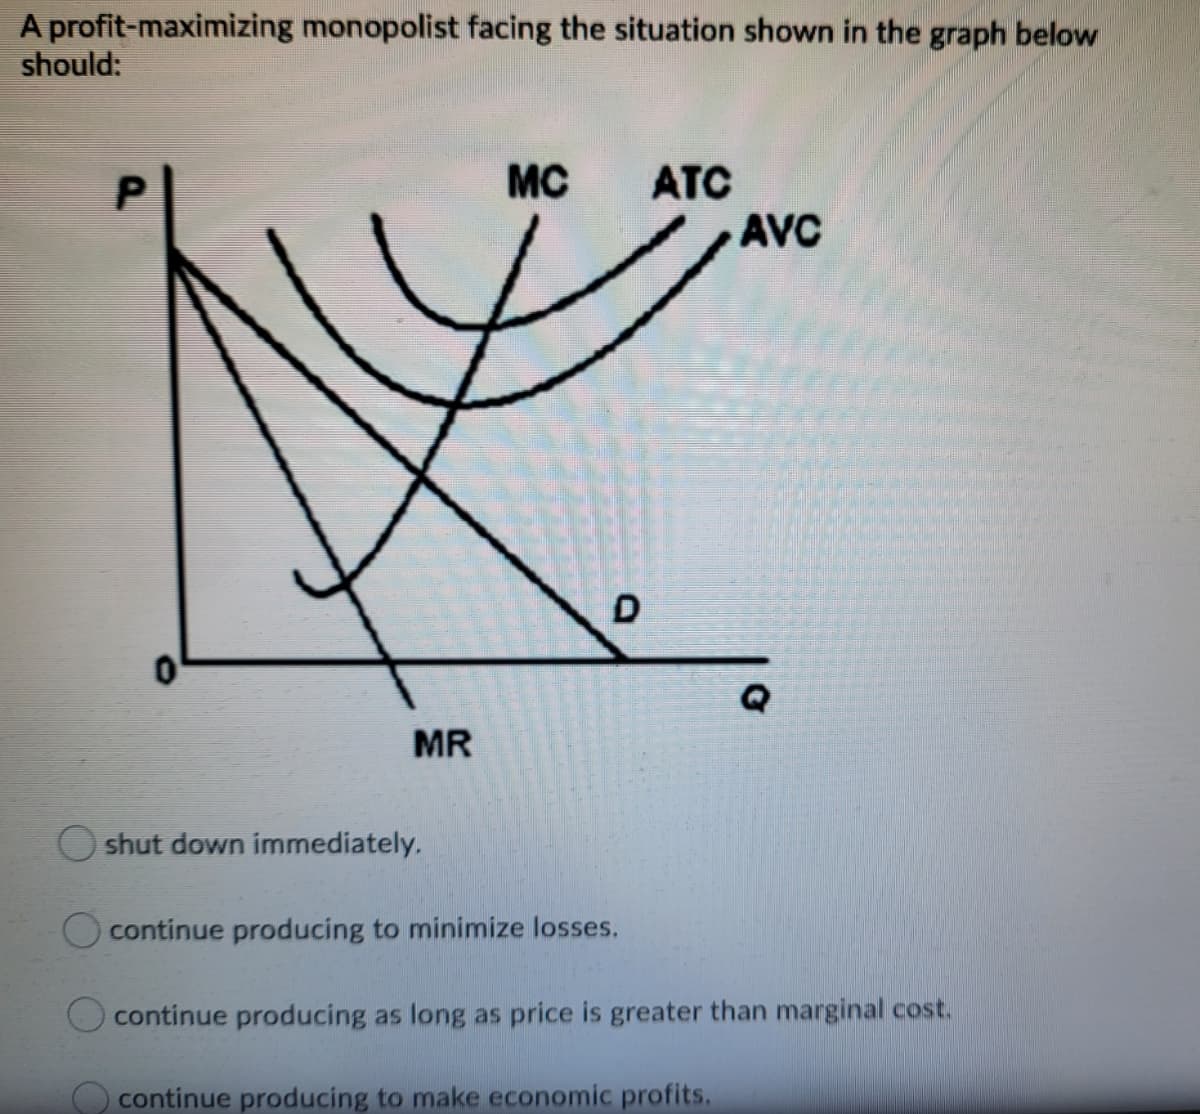 A profit-maximizing monopolist facing the situation shown in the graph below
should:
MC
ATC
AVC
D
MR
O shut down immediately.
O continue producing to minimize losses.
O continue producing as long as price is greater than marginal cost.
O continue producing to make economic profits.
